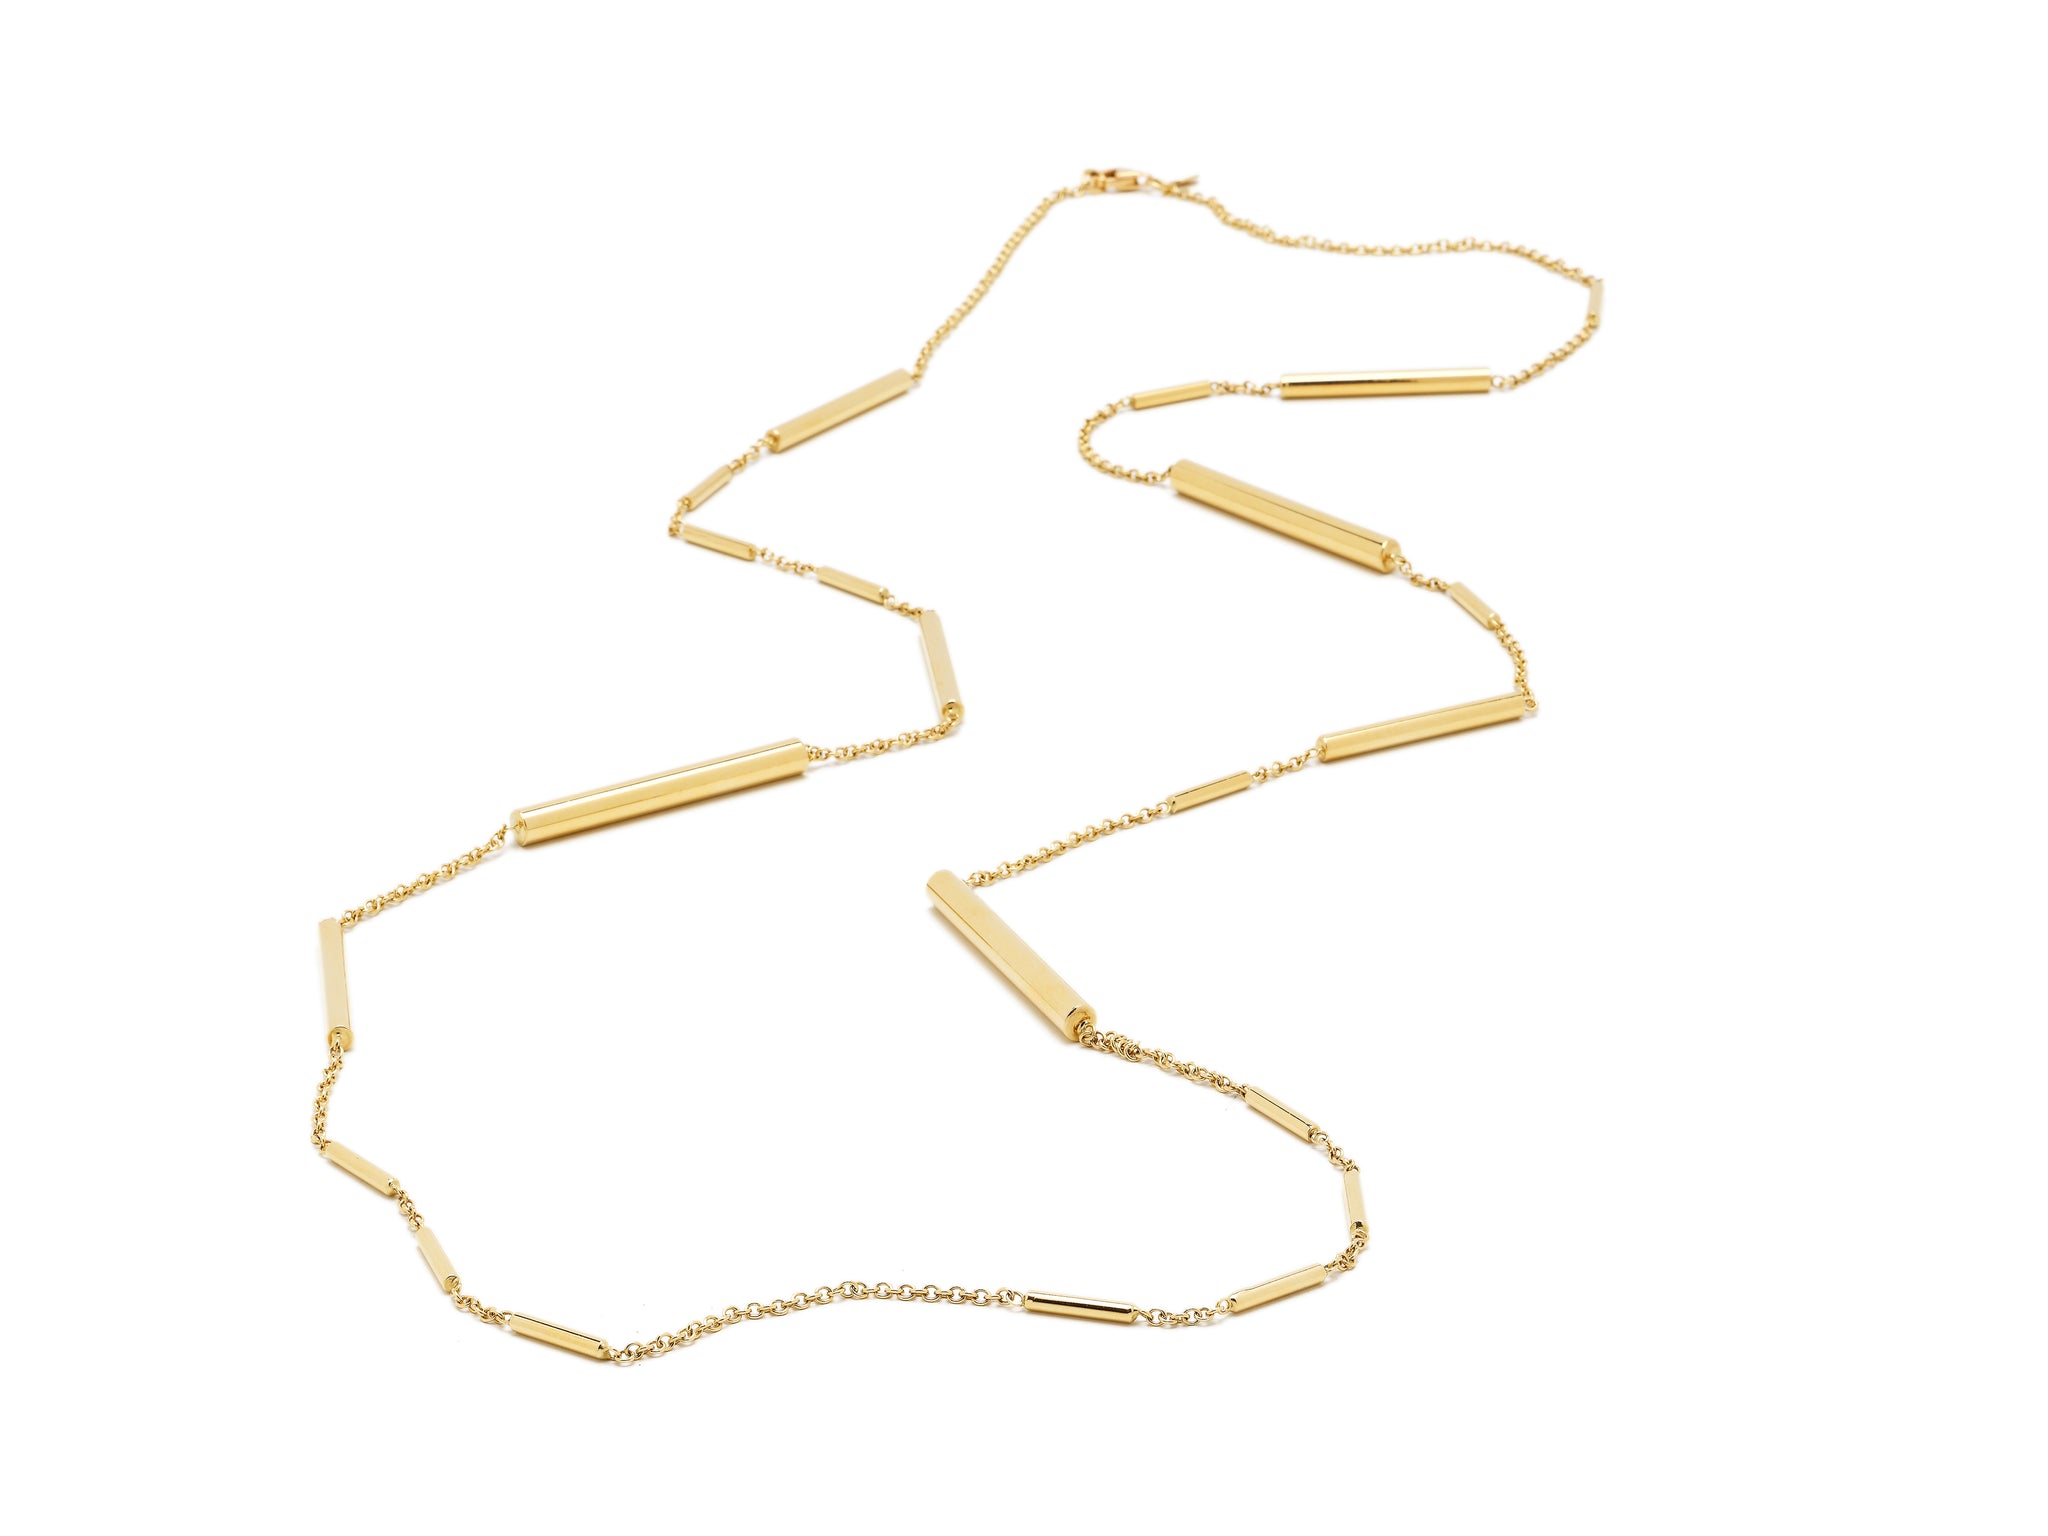 18 krt yellow gold chain with gold sticks (80 cm)